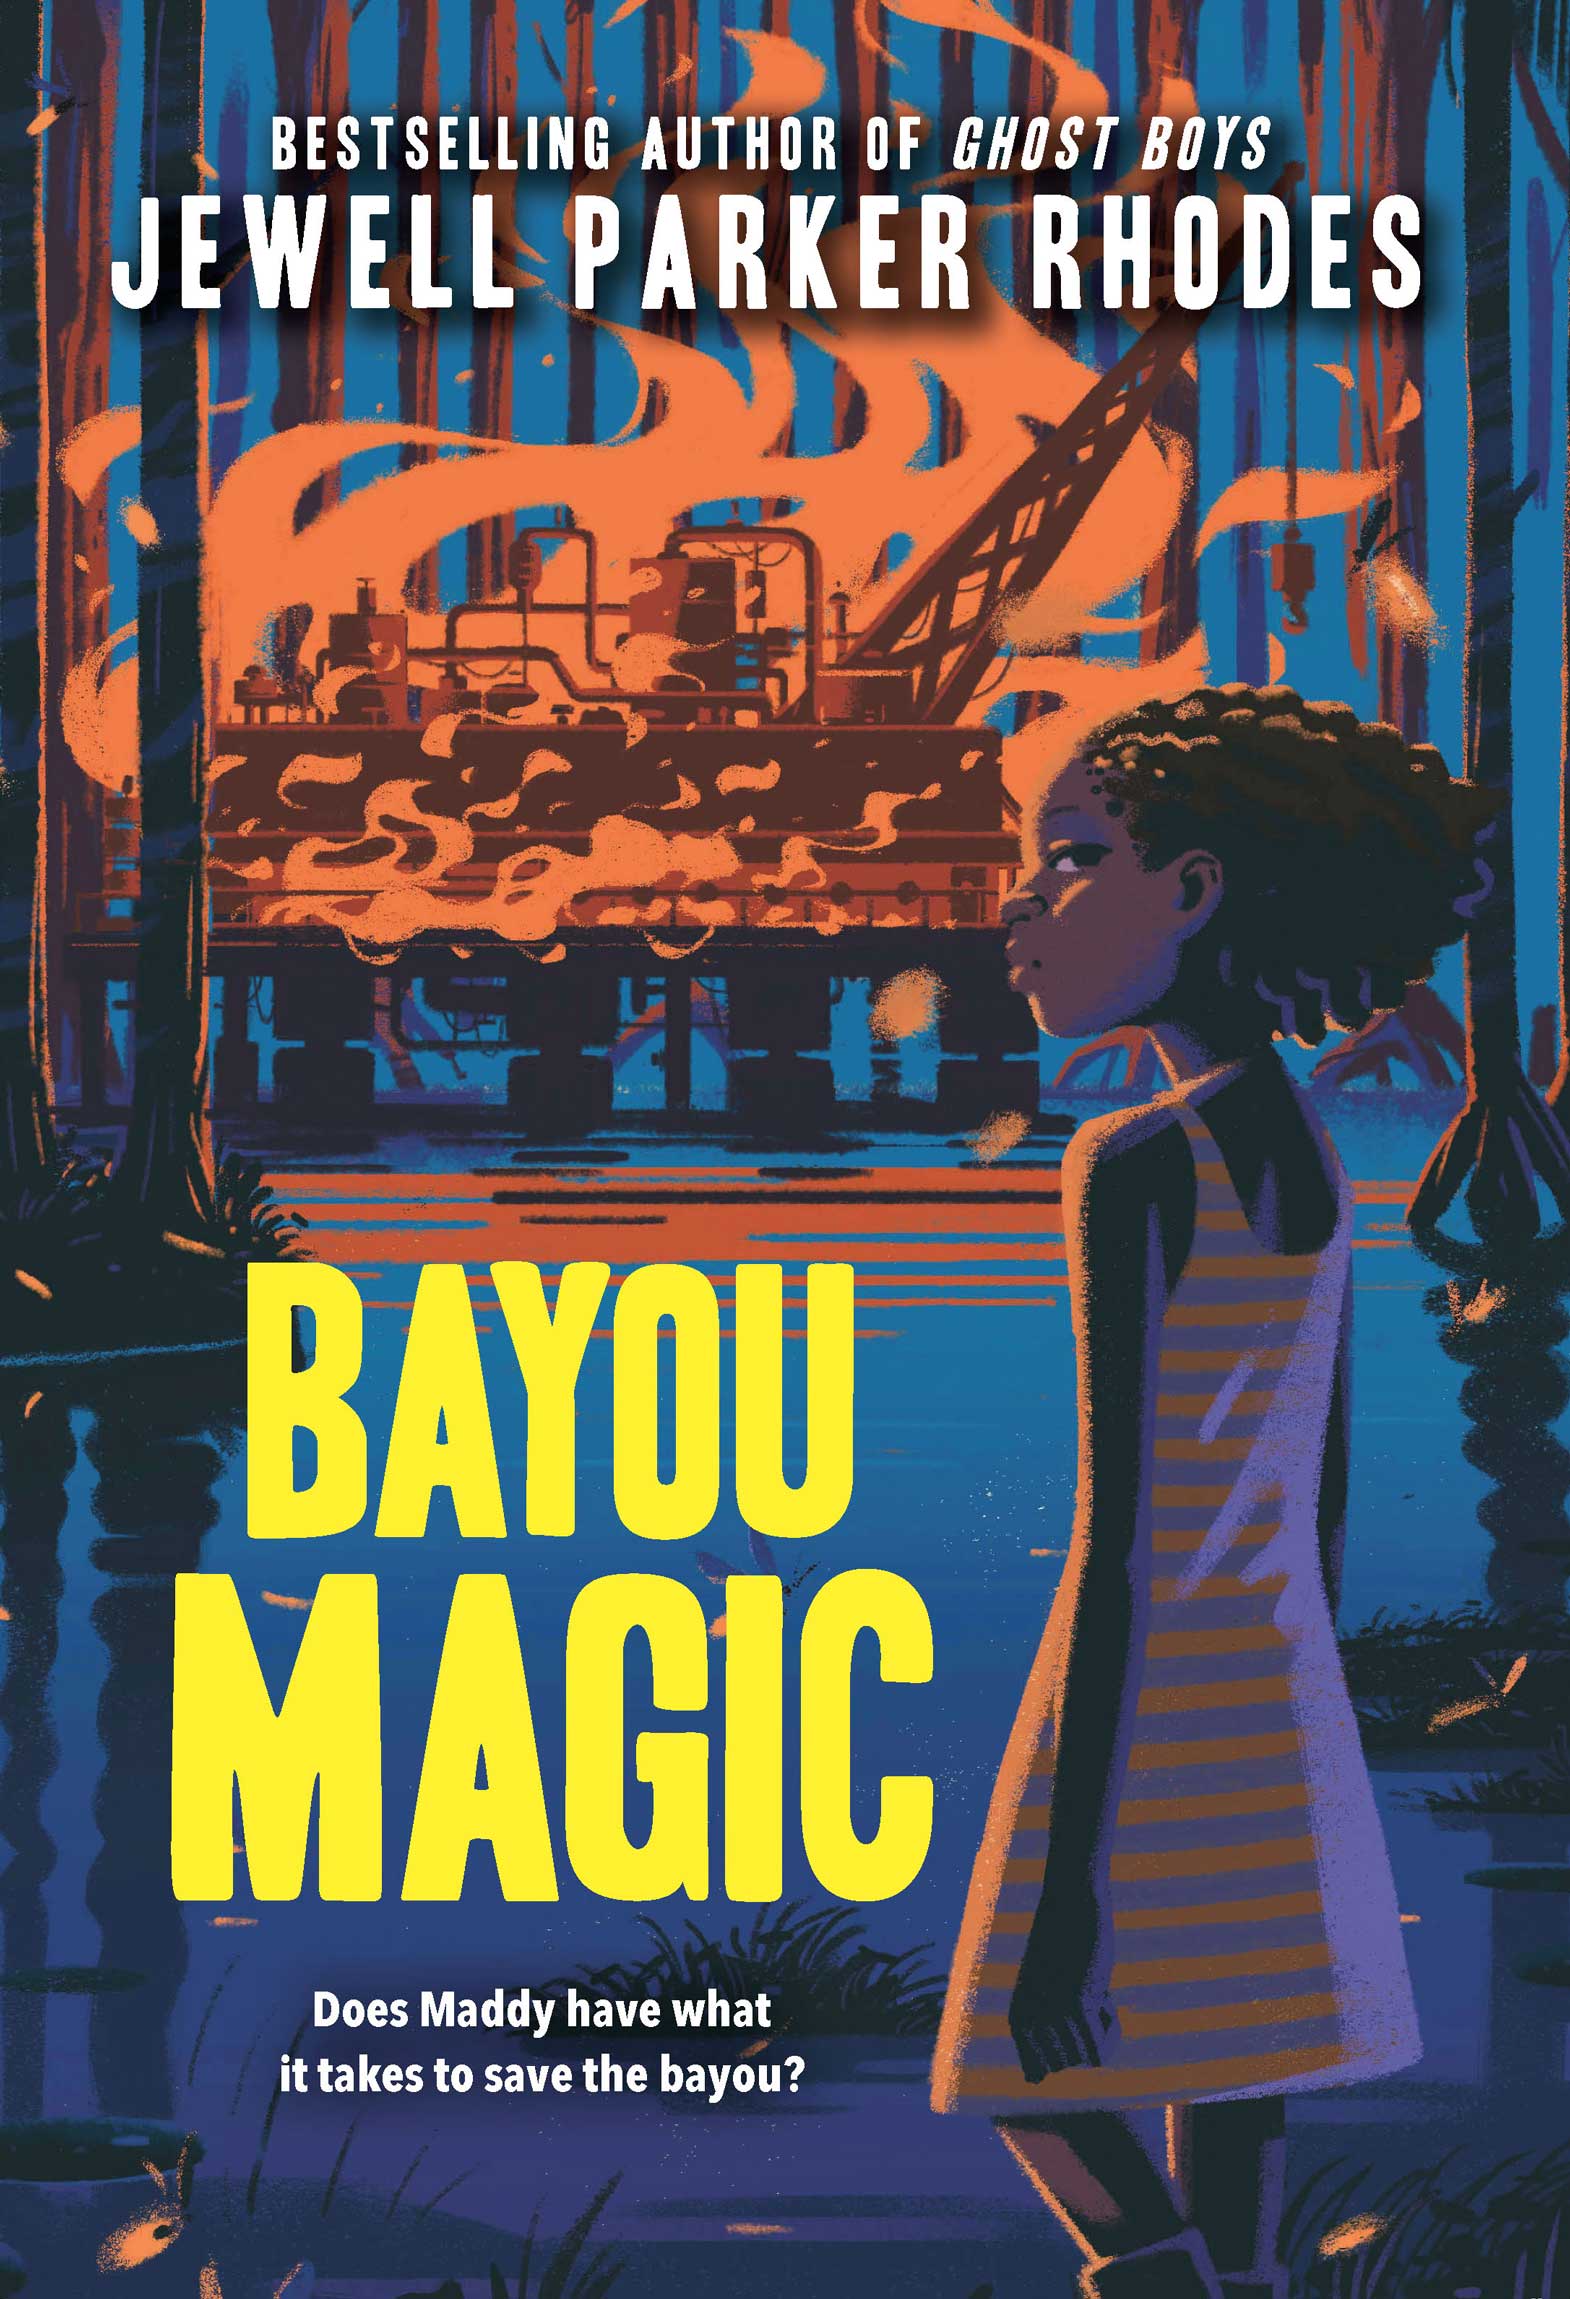 Bayou Magic book cover, with a drawing of a young girl looking at a fire with the words "Does Maddy have what it takes to save the bayou?" written.